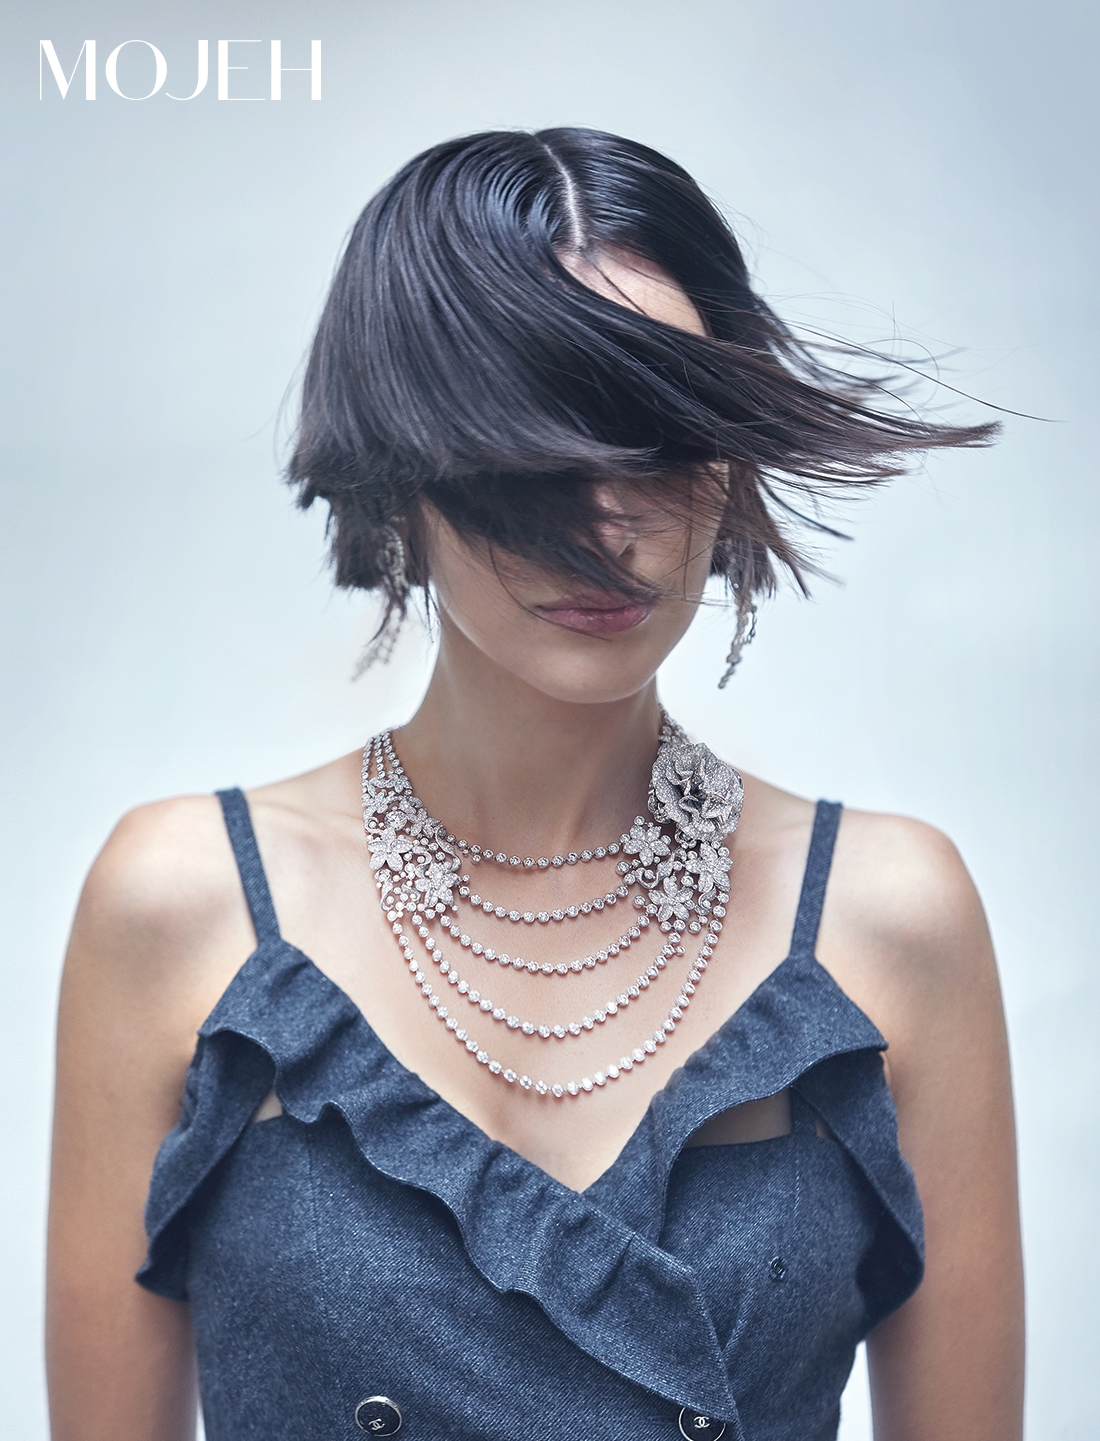 The Shoot: Chanel High Jewellery Celebrates 100 Years Of No.5 - MOJEH